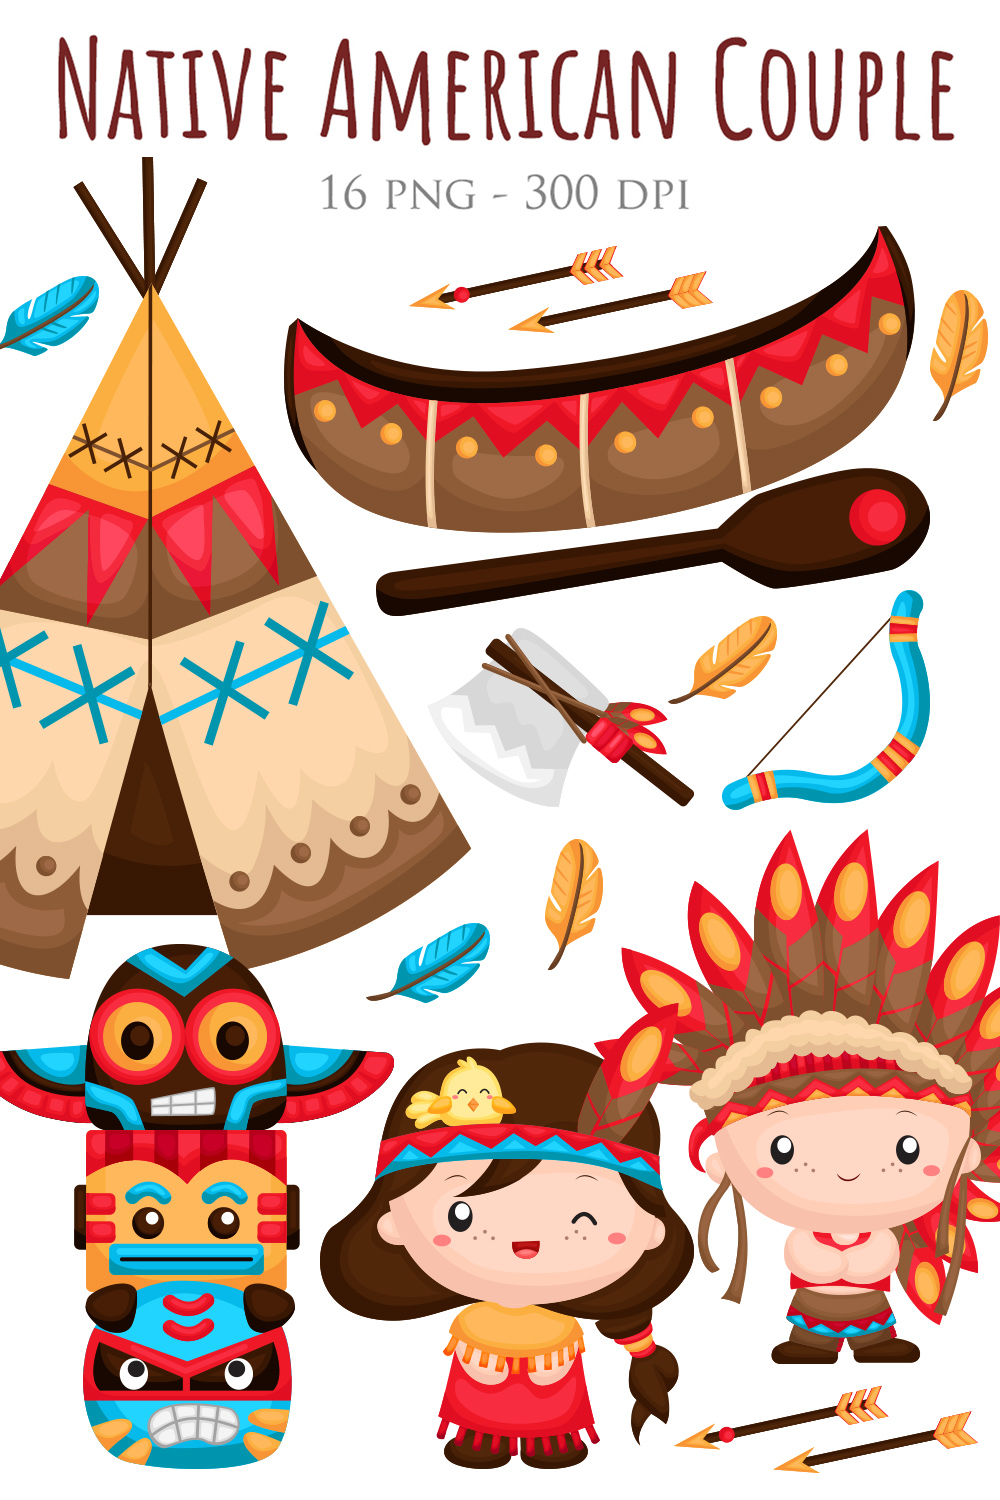 Cute Native American Couple Kids Indians Culture Costume and Ornaments Decoration Object Cartoon Illustration Vector Clipart Sticker Background pinterest preview image.